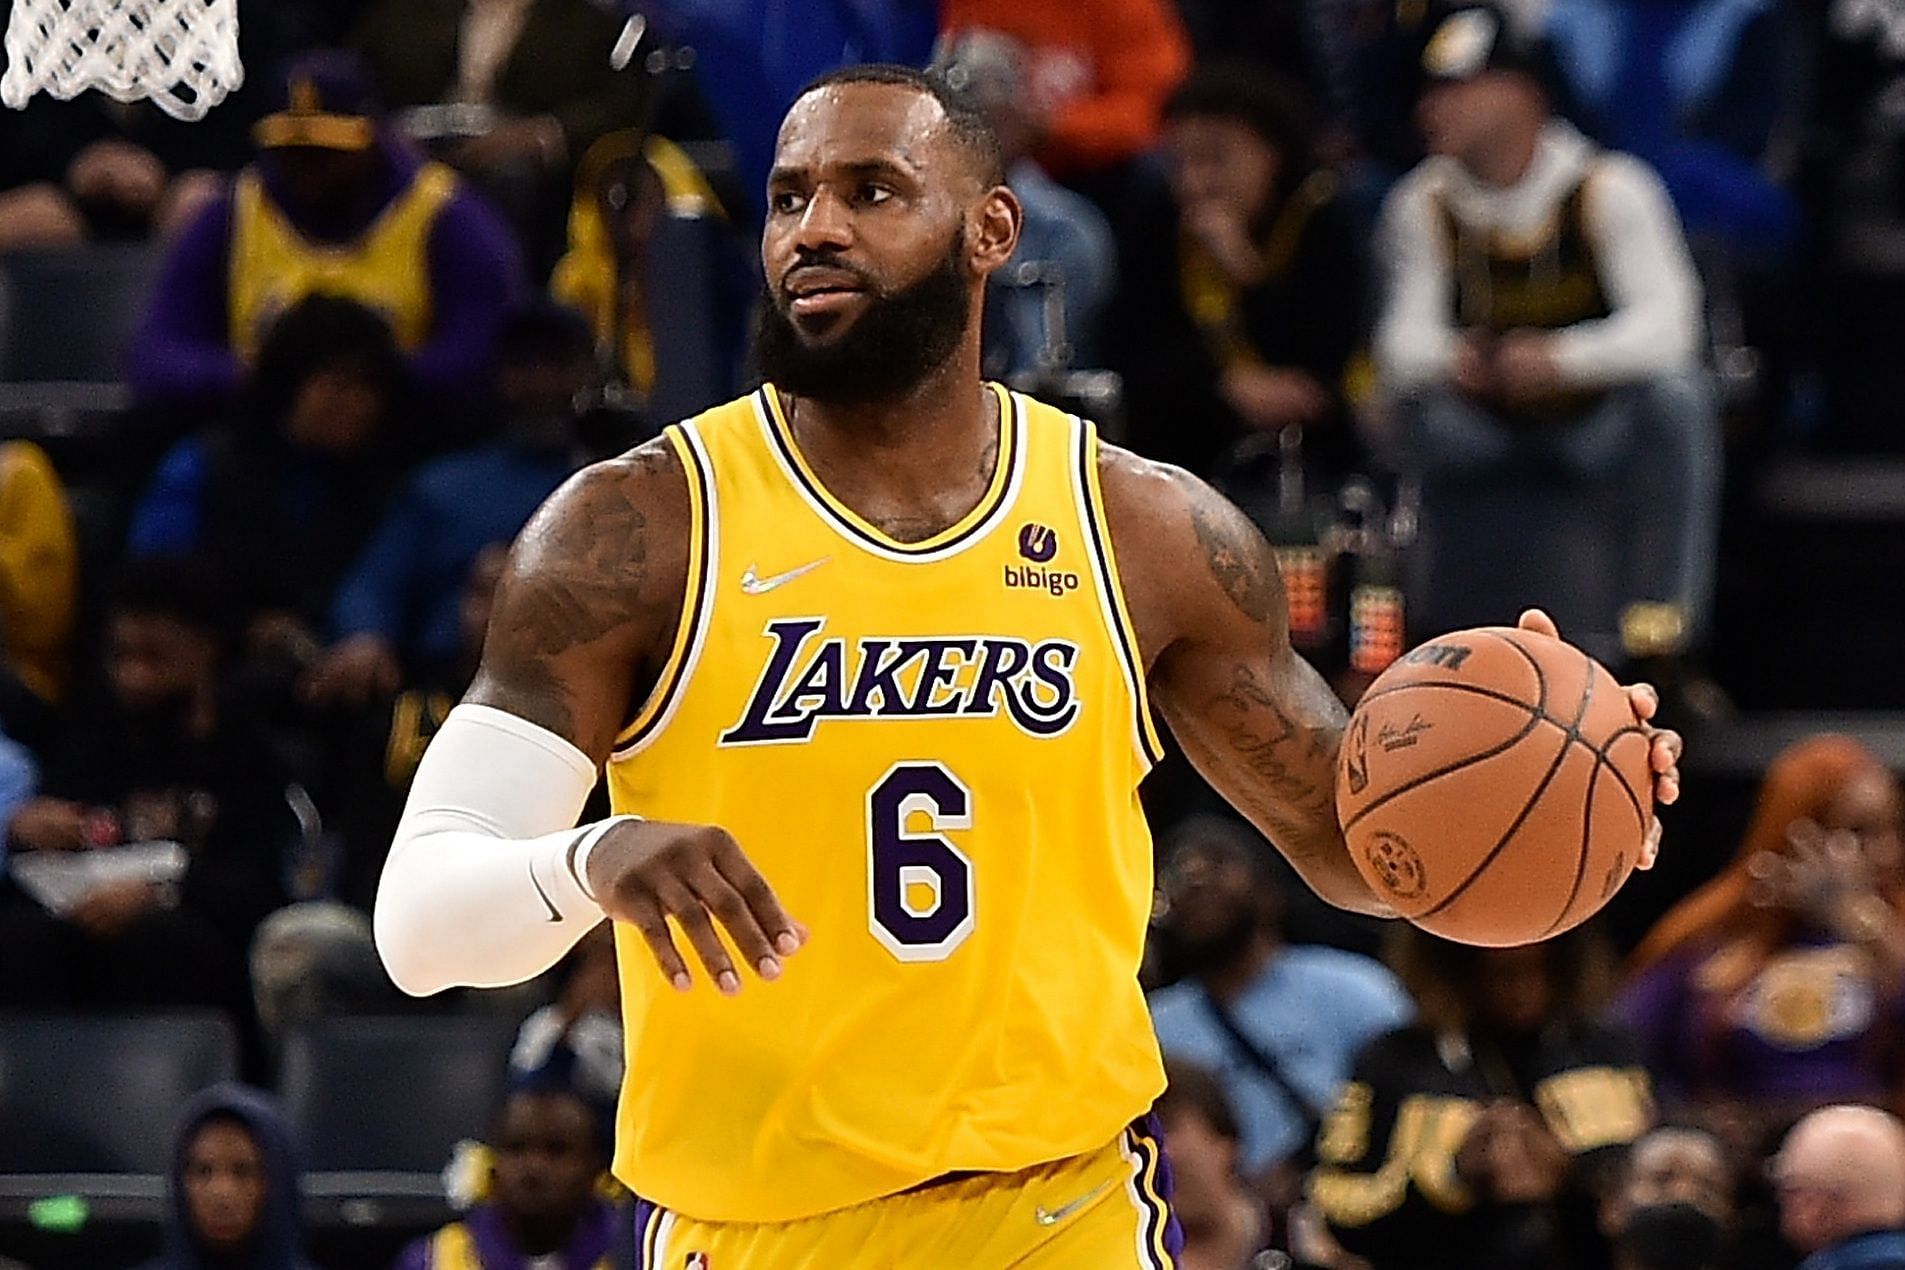 ESPN's Zach Lowe says LeBron James wants to finish his career with